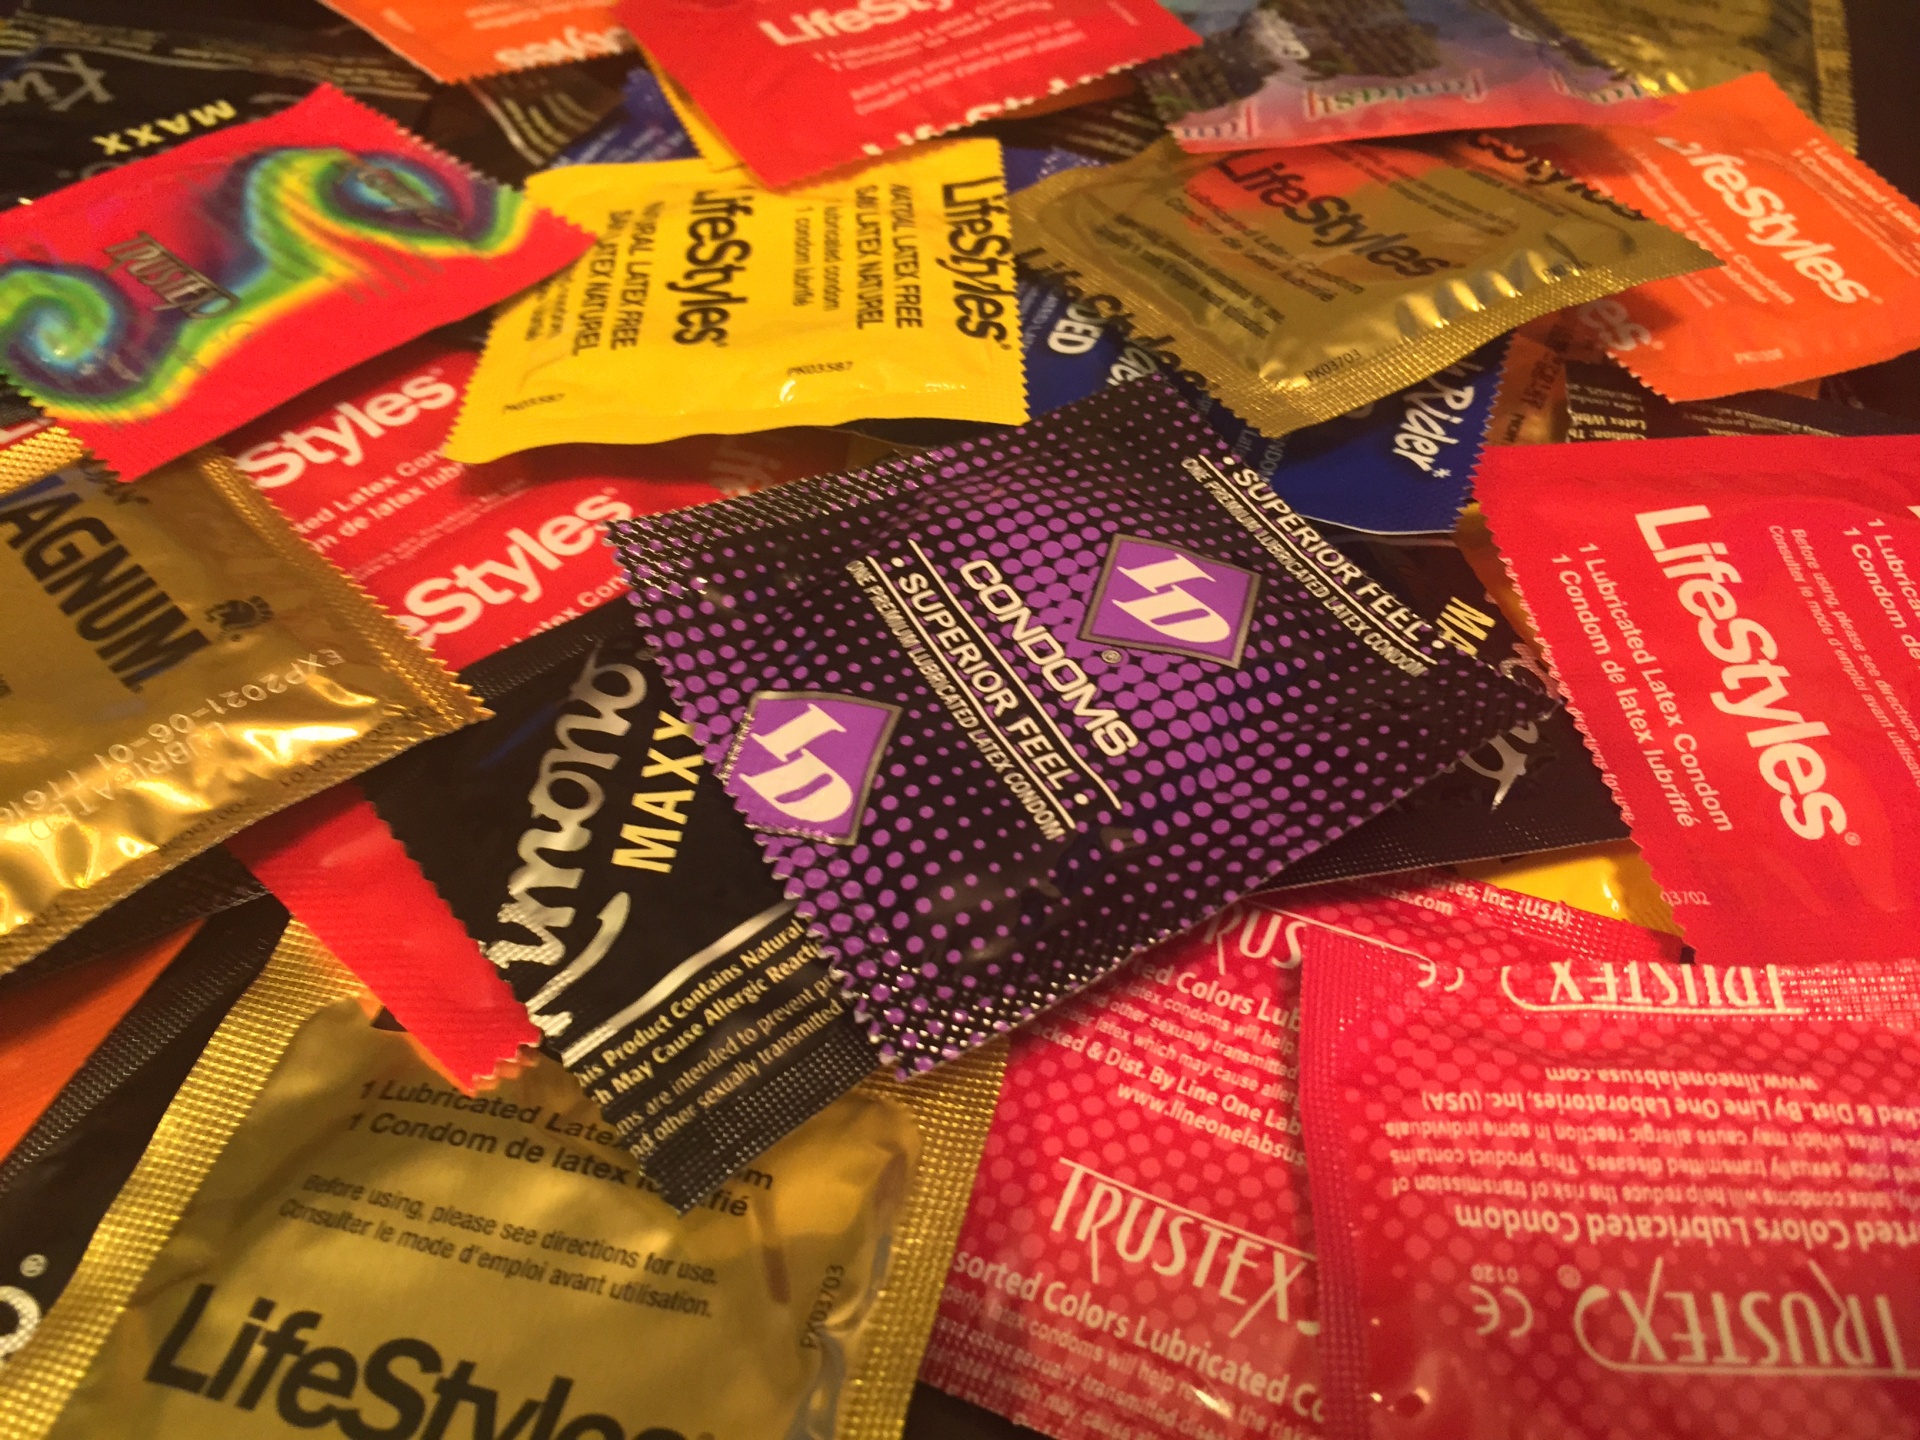 Everything you need to know about condoms - Better than the Hand